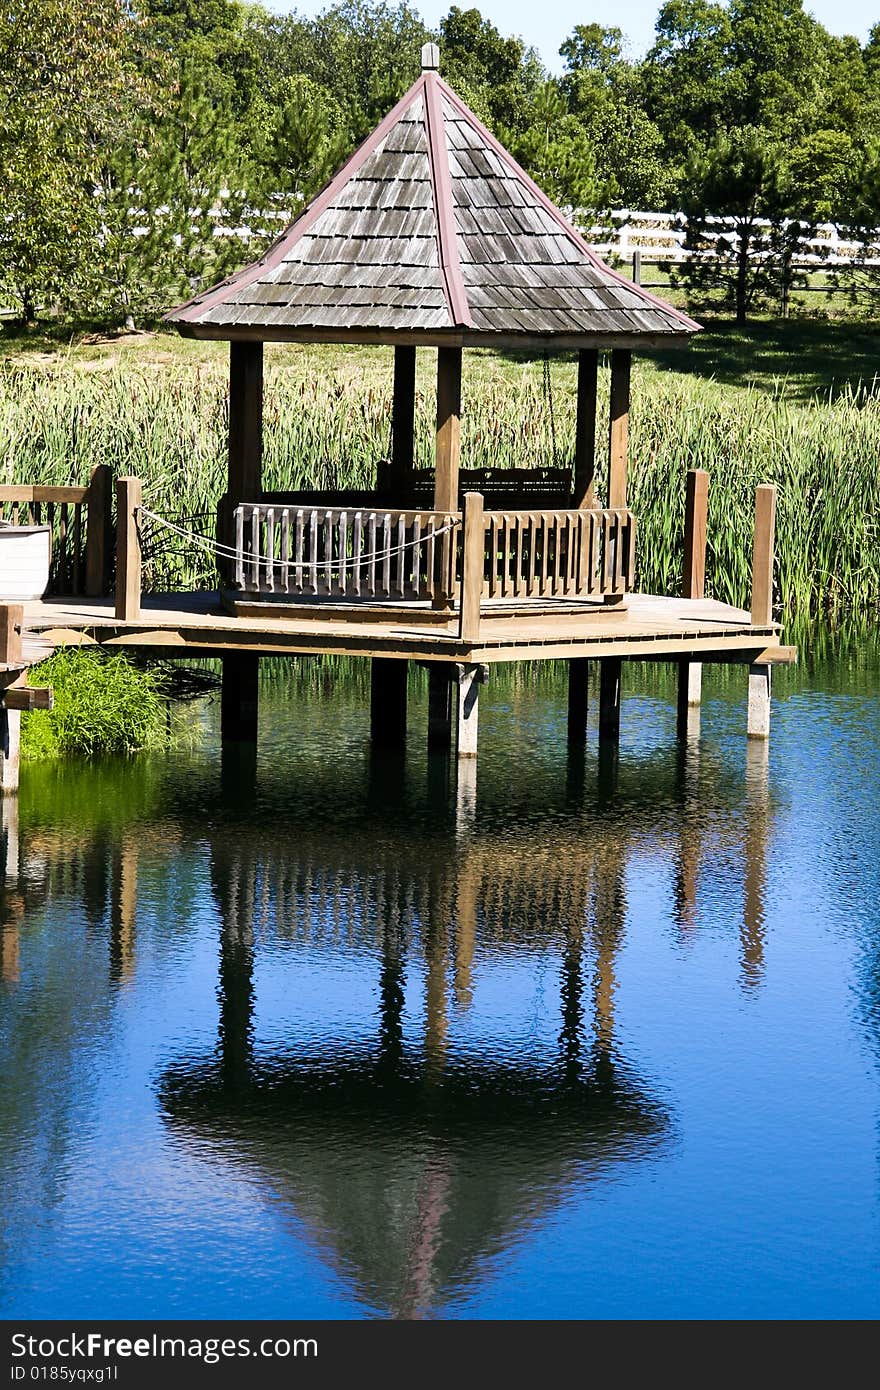 Gazebo with wooden shingles at pond with blue reflection. Gazebo with wooden shingles at pond with blue reflection